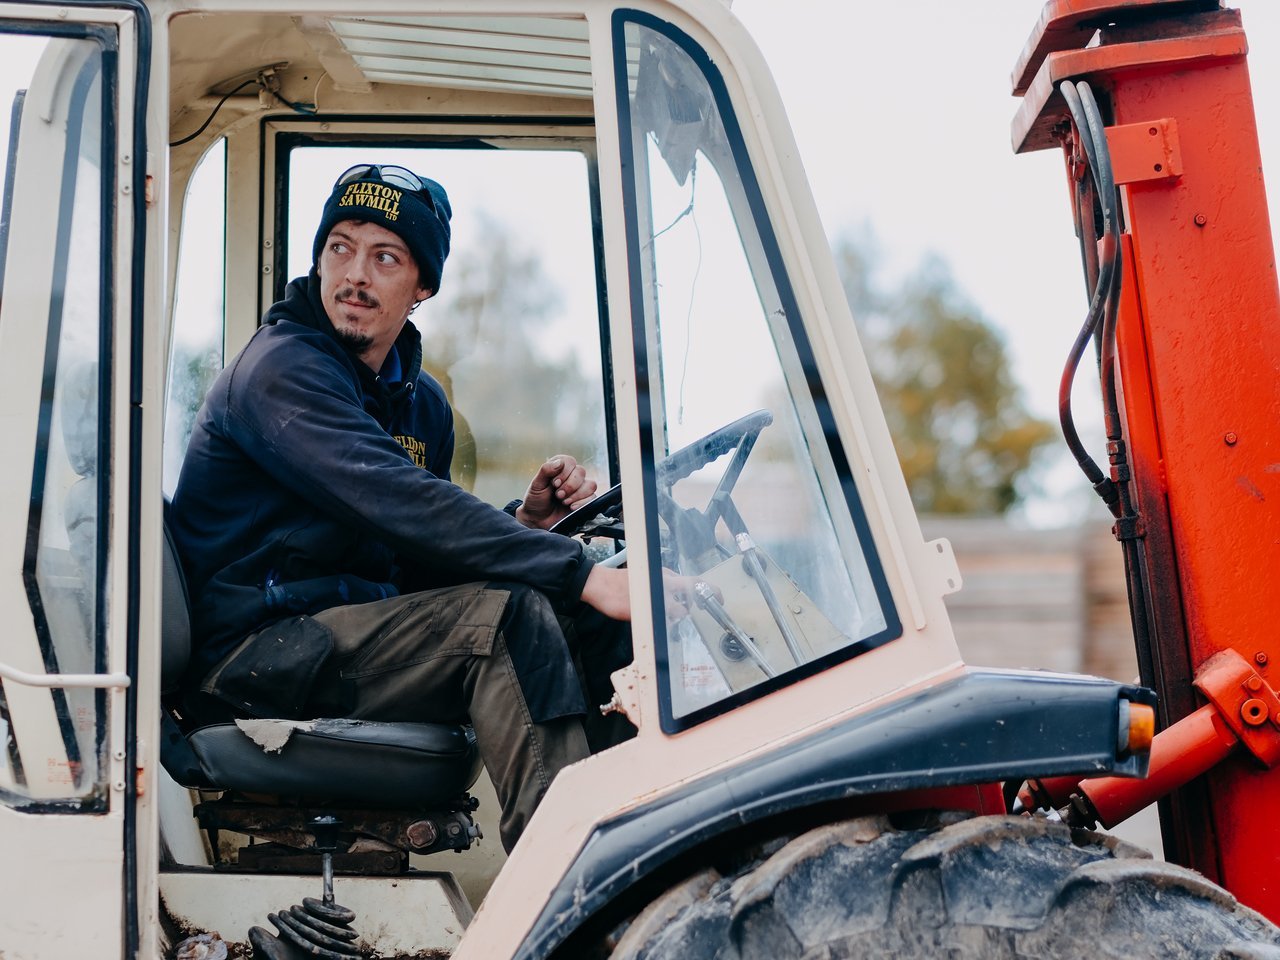 A portrait of a man in uniform driving a tractor